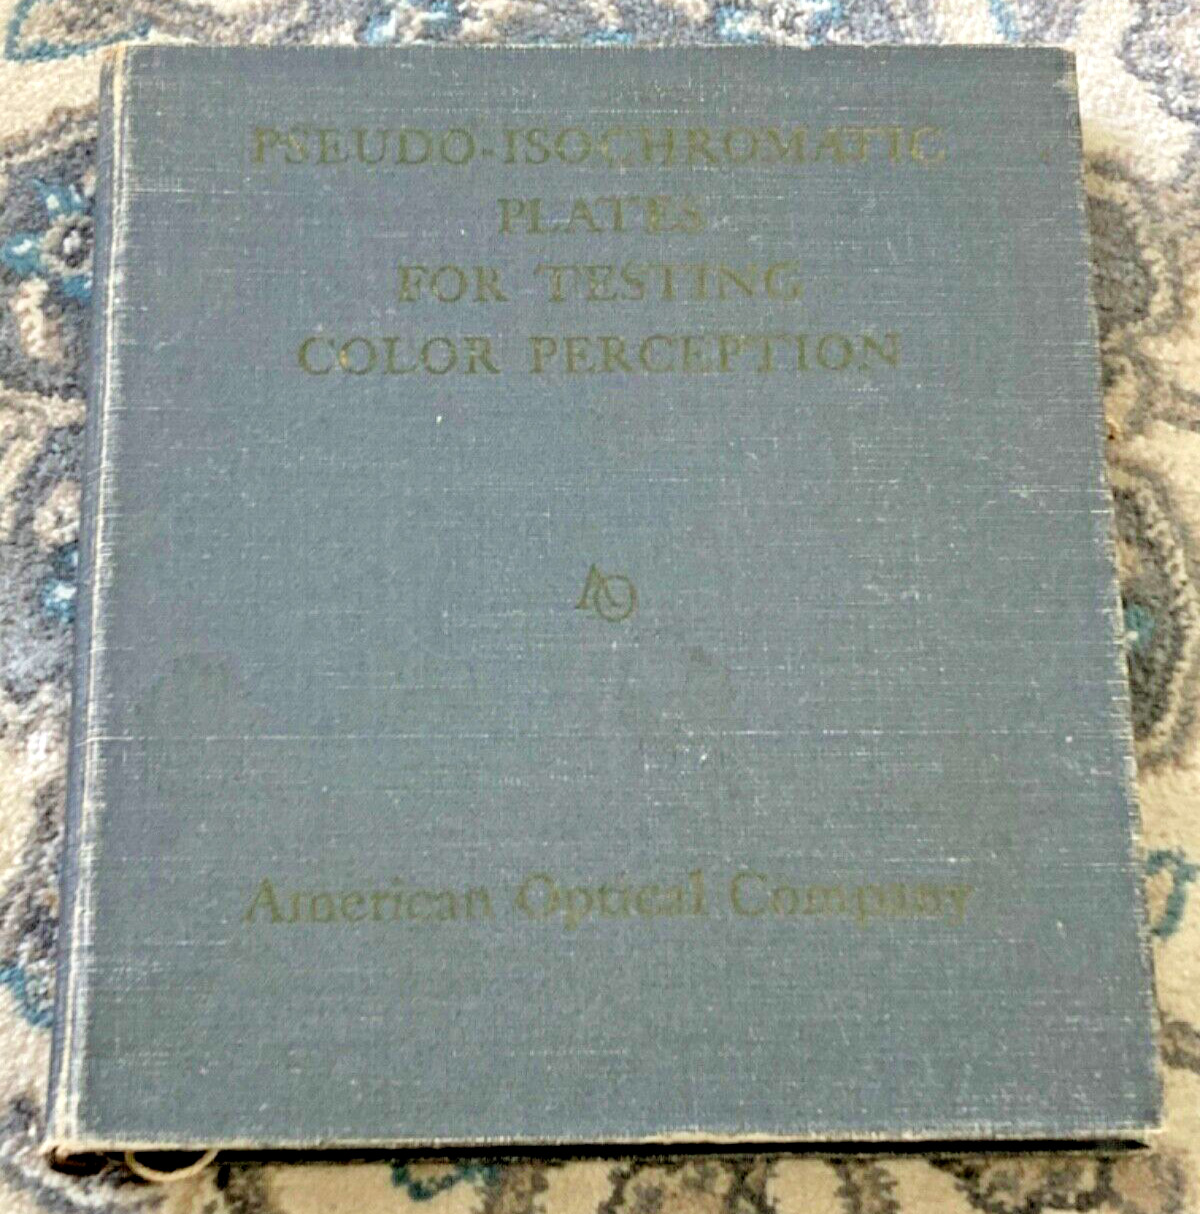 PSEUDO-ISOCHROMATIC PLATES FOR TESTING COLOR PERCEPTION BOOK AO VTG 1940 WWII